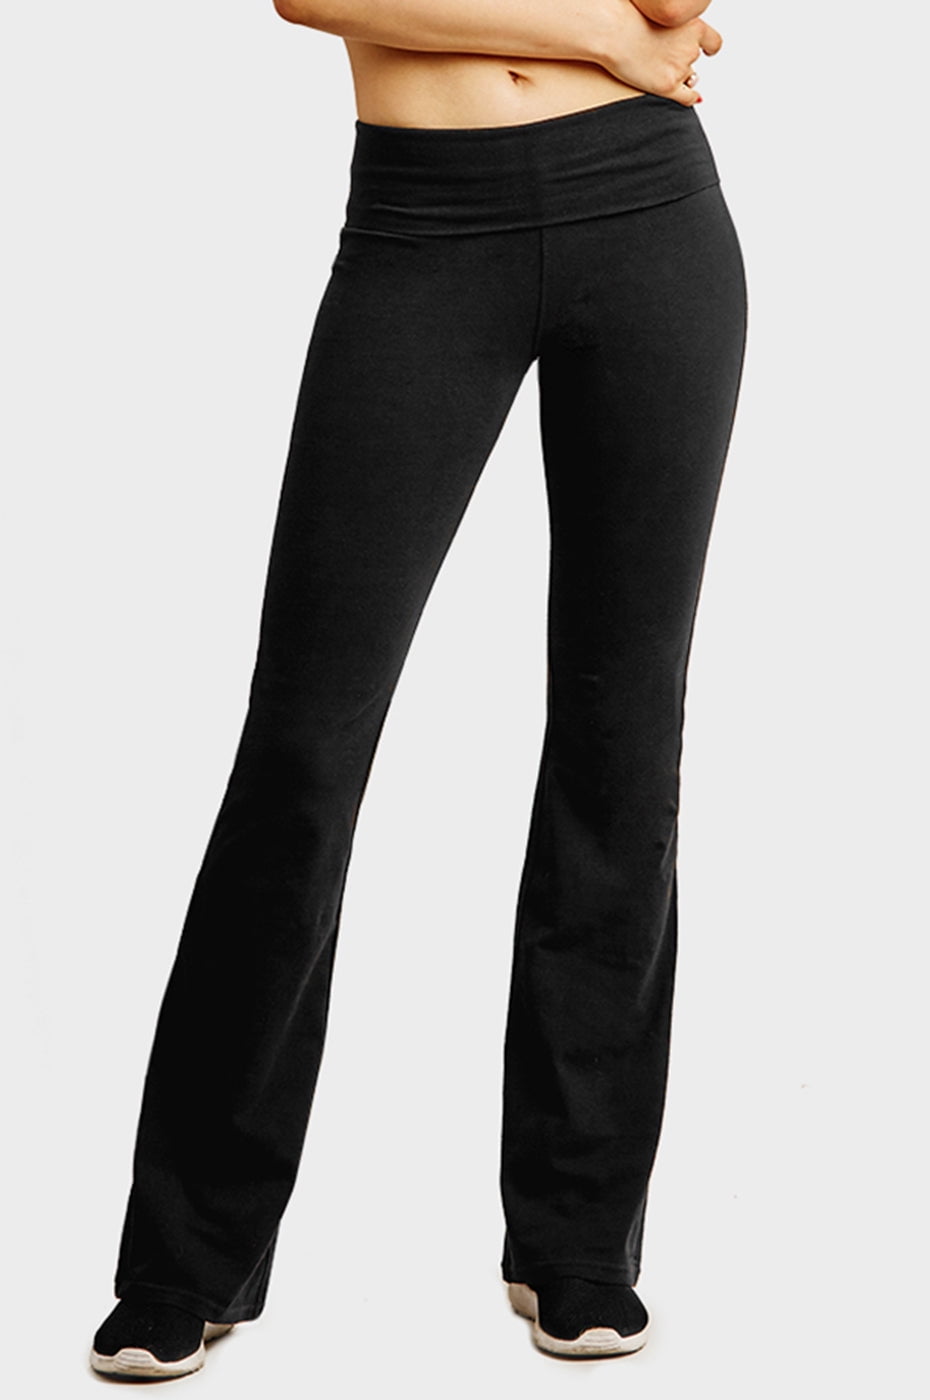 Gilbins Womens Fold Over Yoga Pants Waistband Stretchy Cotton Blend with A  Wide Flare Leg Yoga Workout Pants Black 